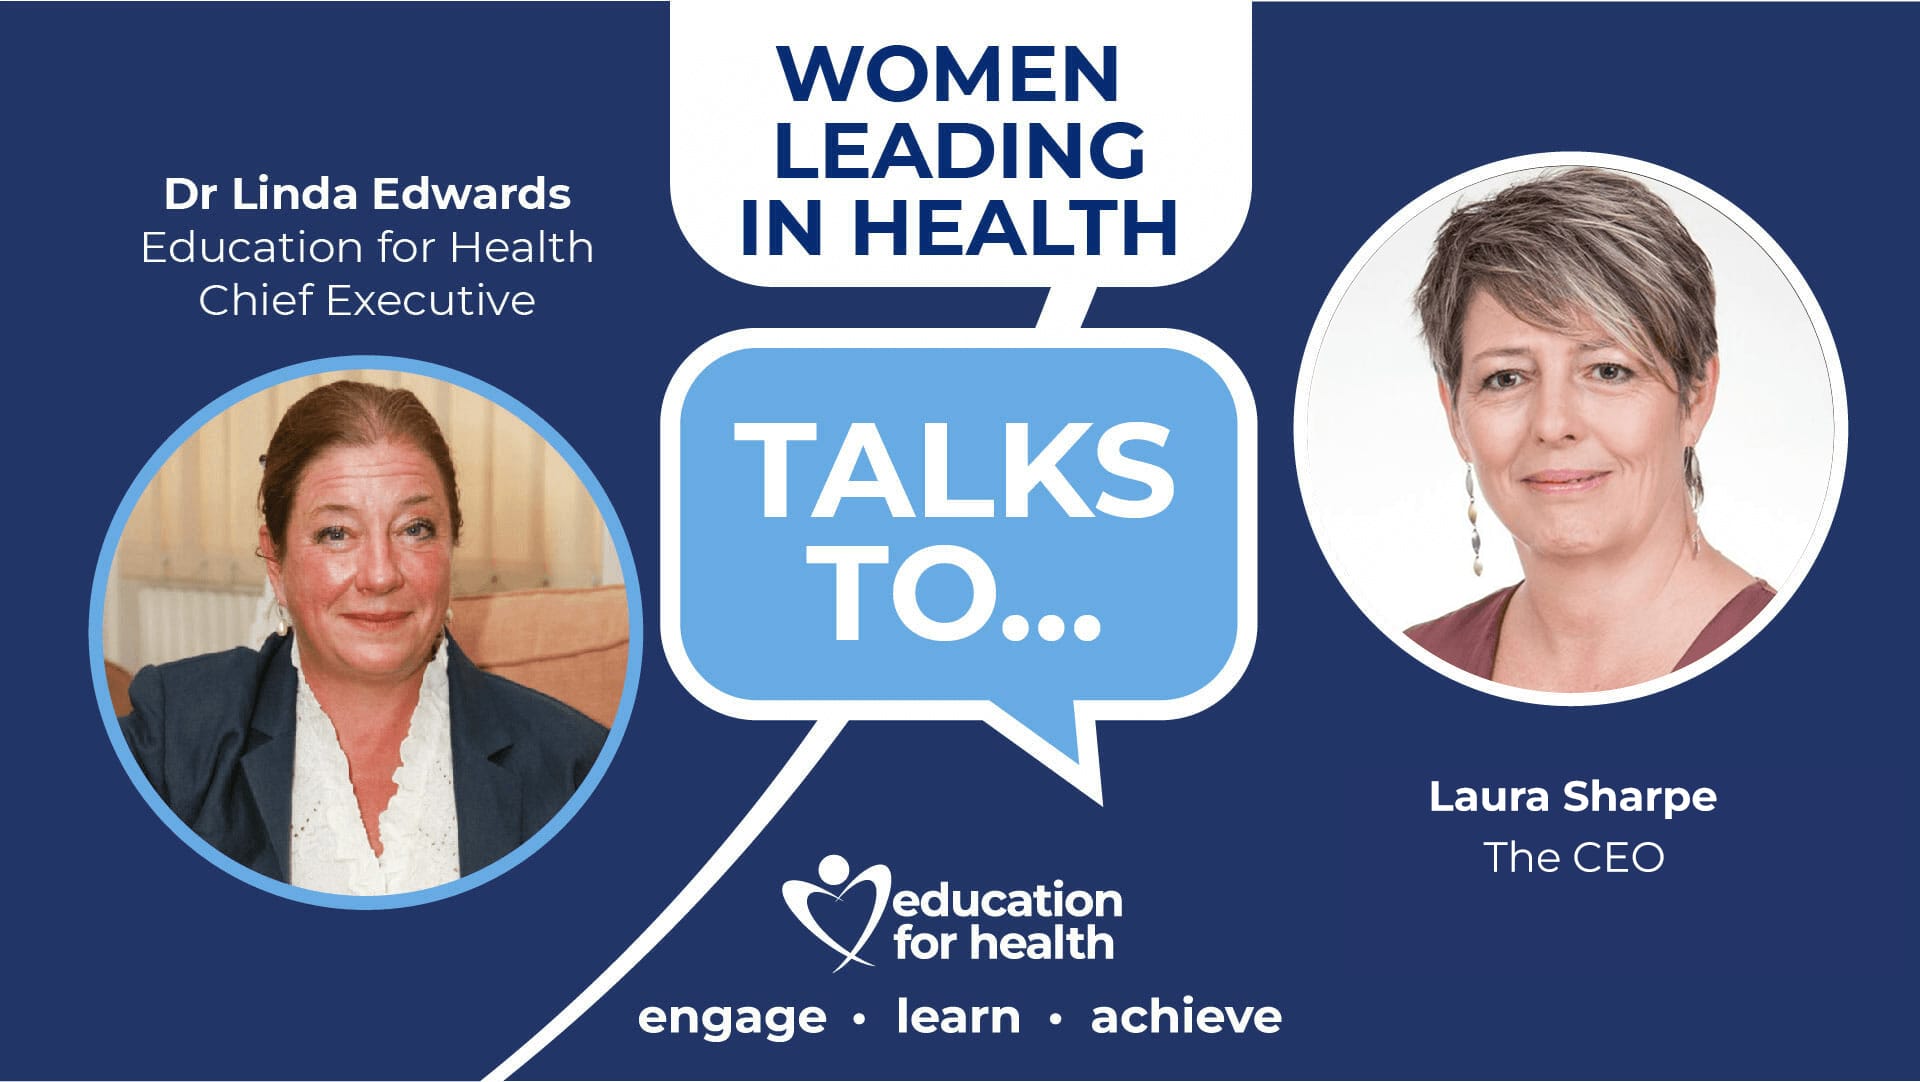 Women leading in health 
The CEO - featuring Laura Sharpe